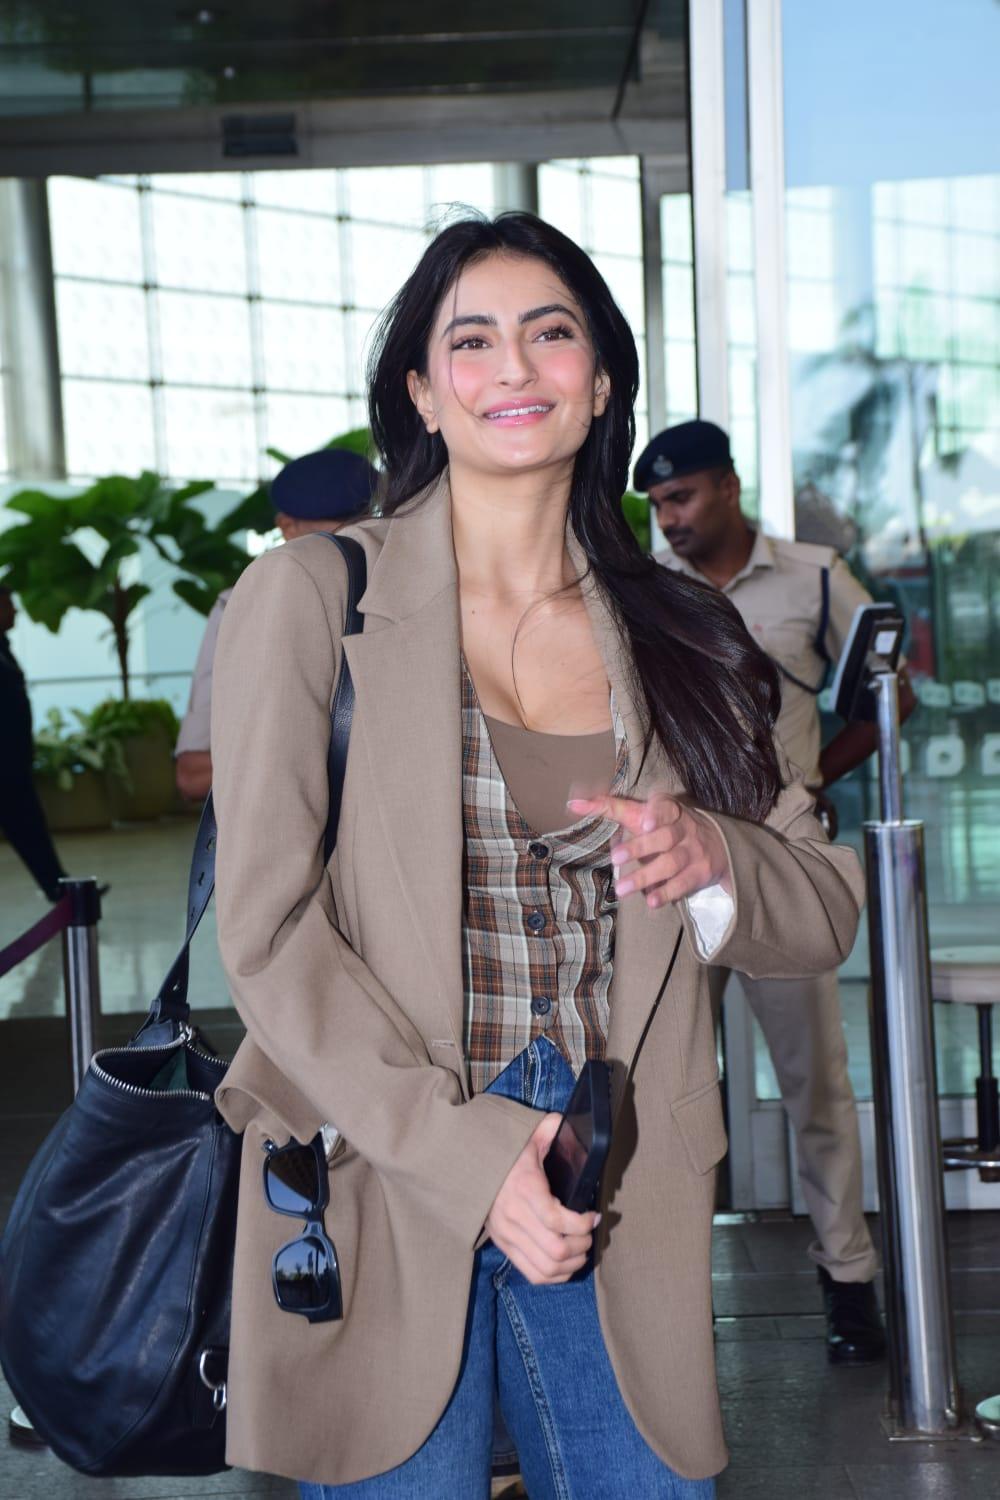 Palak Tiwari turned heads at the Mumbai airport today. The actress looked chic as she posed for the cameras